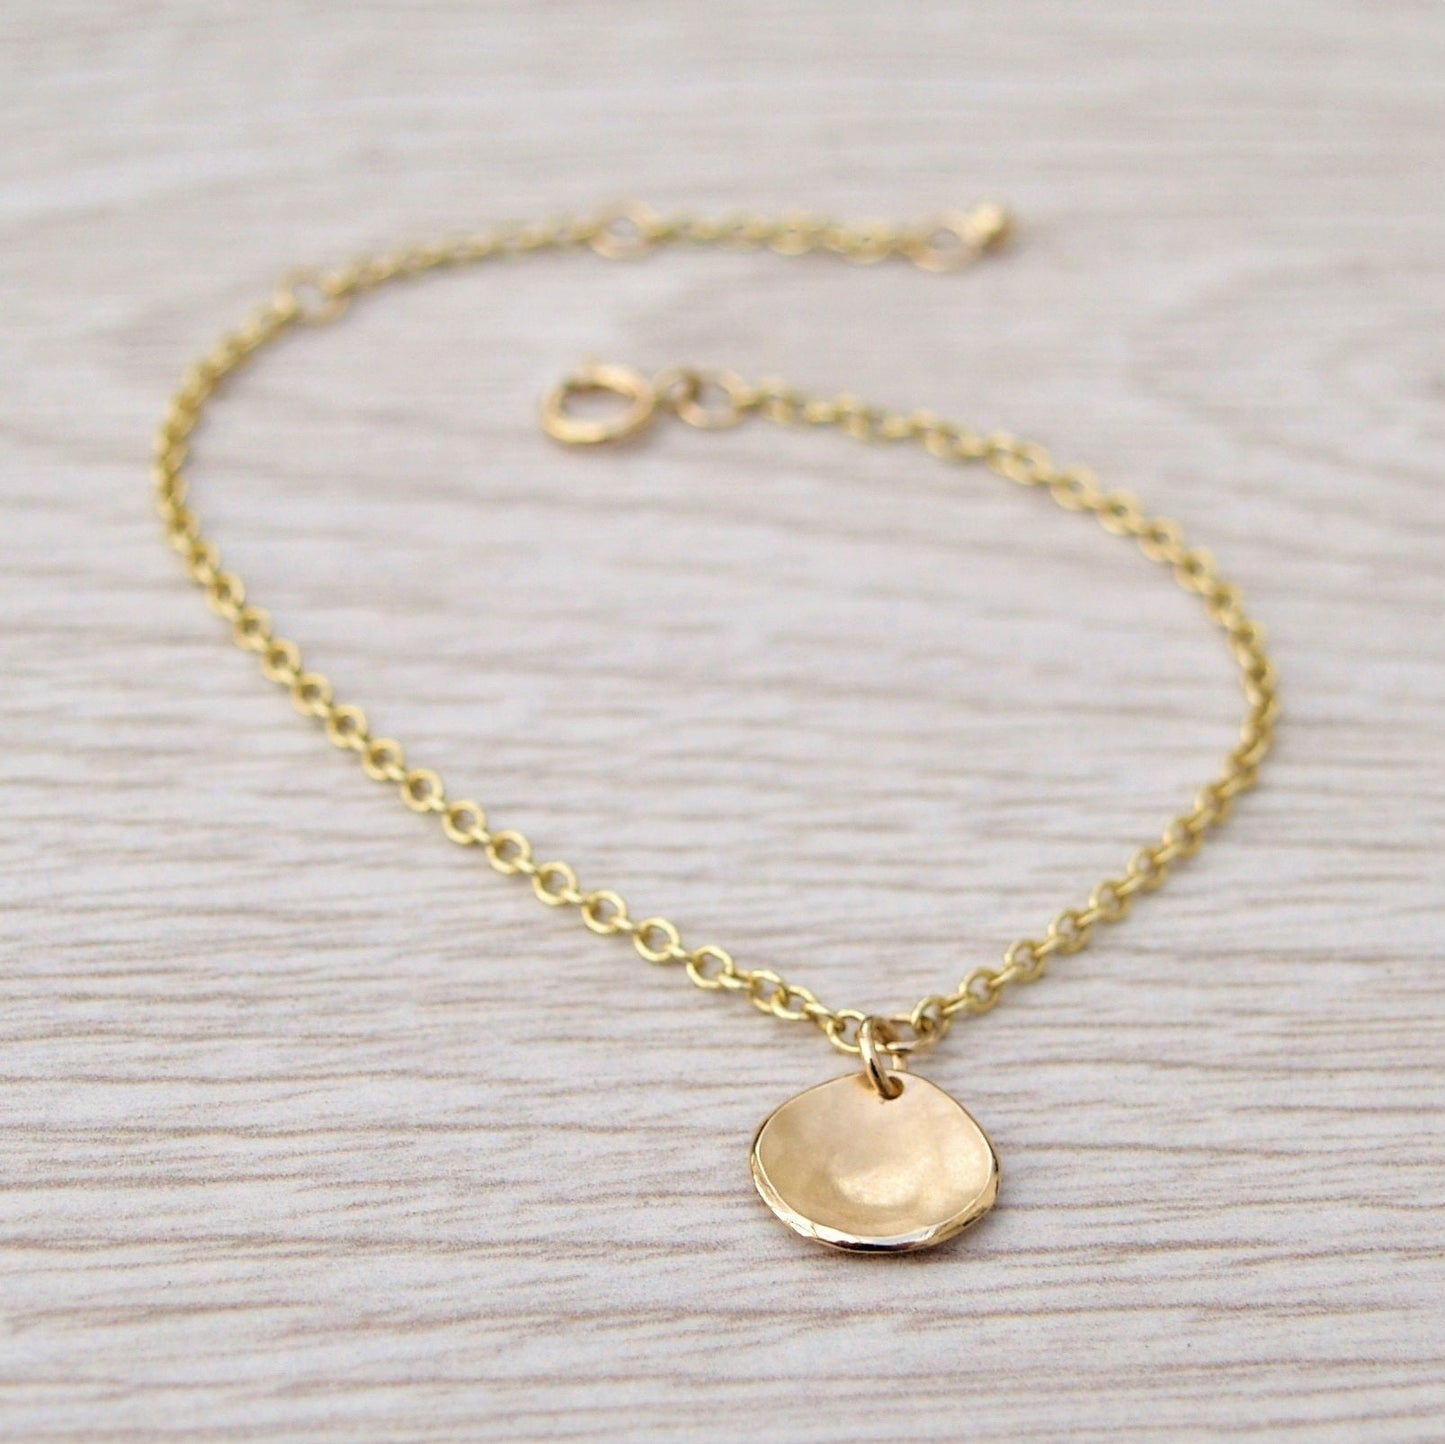 Handmade to order - 9ct yellow gold chain bracelet with a small size petal charm